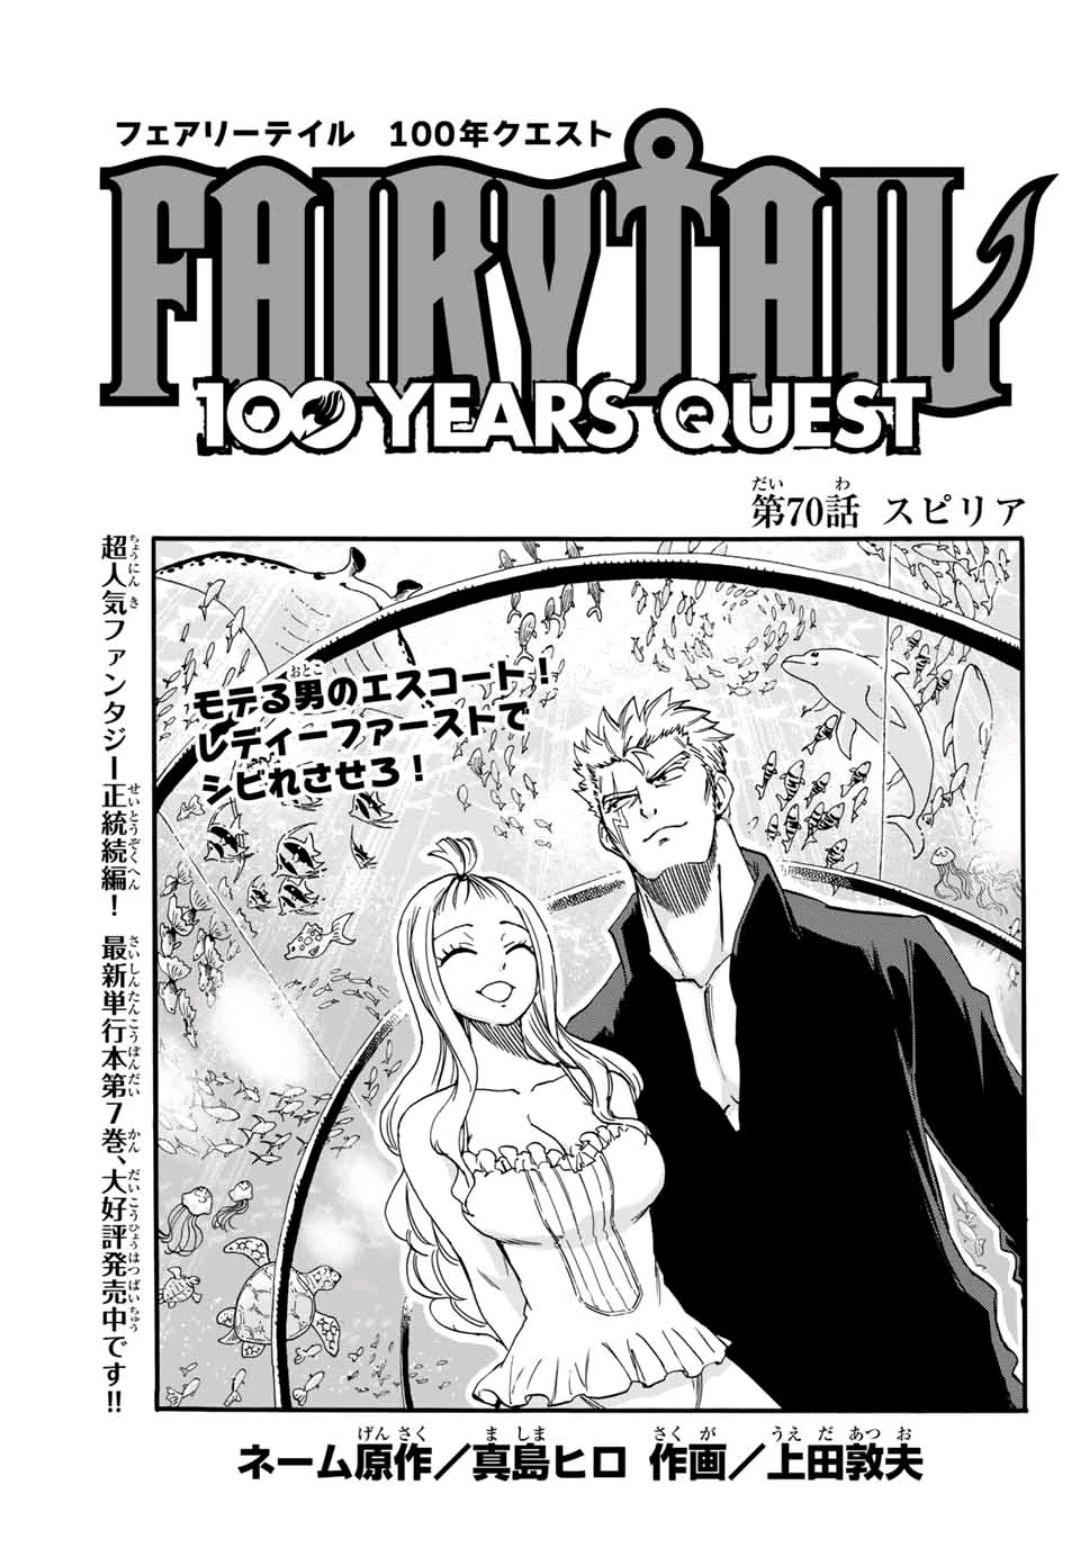 Fairy Tail 100 Years Quest Chapter 70 Fairy Tail Wiki Fandom